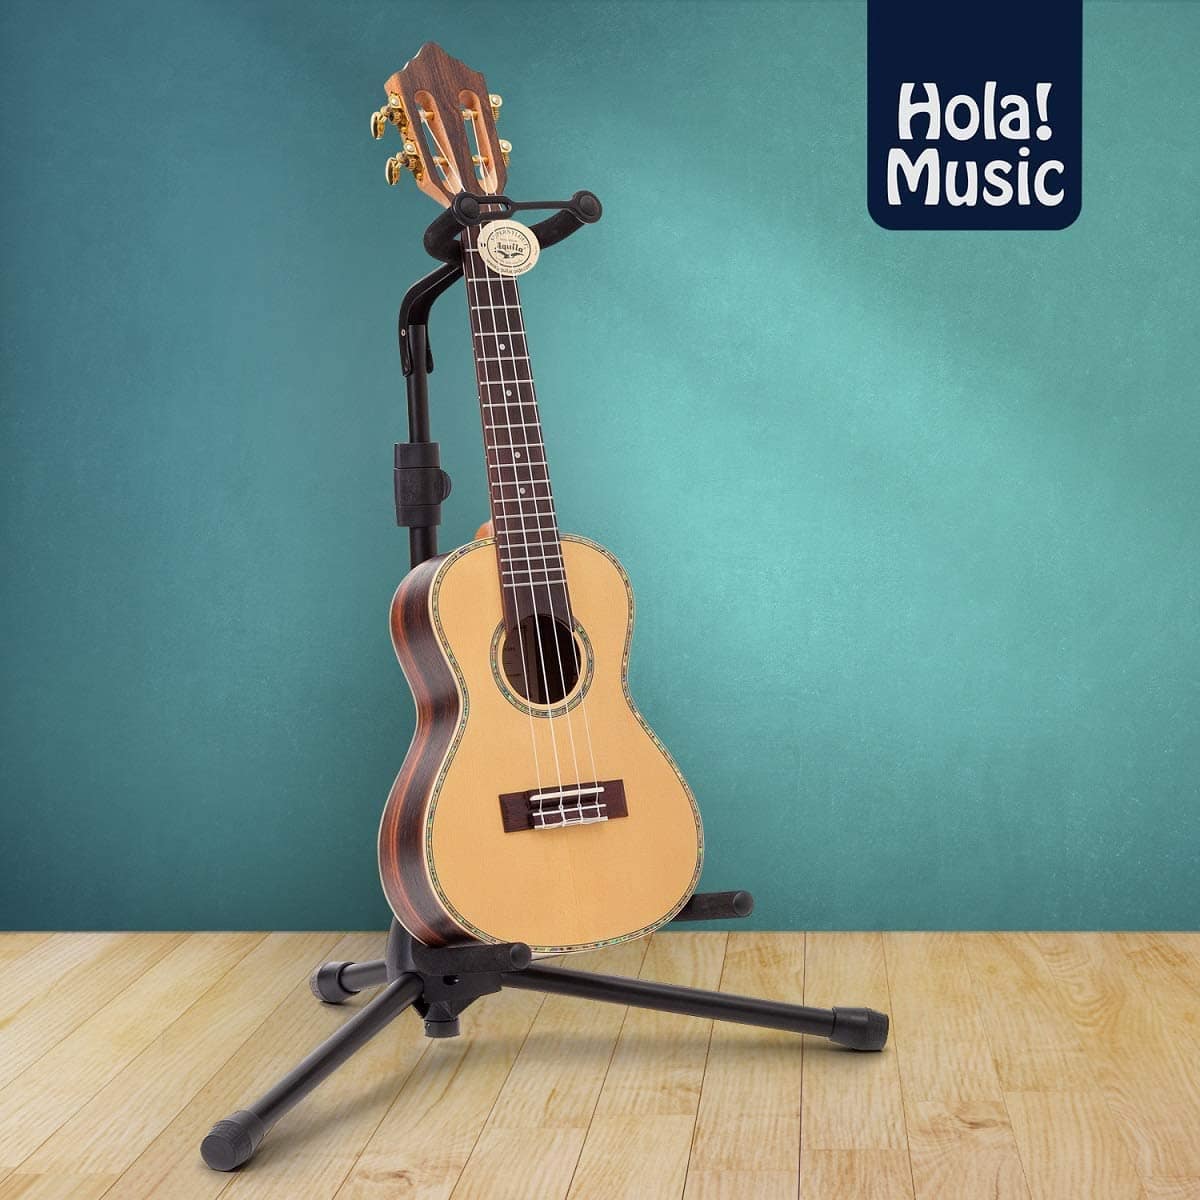 Universal Guitar Stand by Hola! Music – Fits Acoustic, Classical, Electric, Bass Guitars, Mandolins, Banjos, Ukuleles and Other Stringed Instruments – Black 14